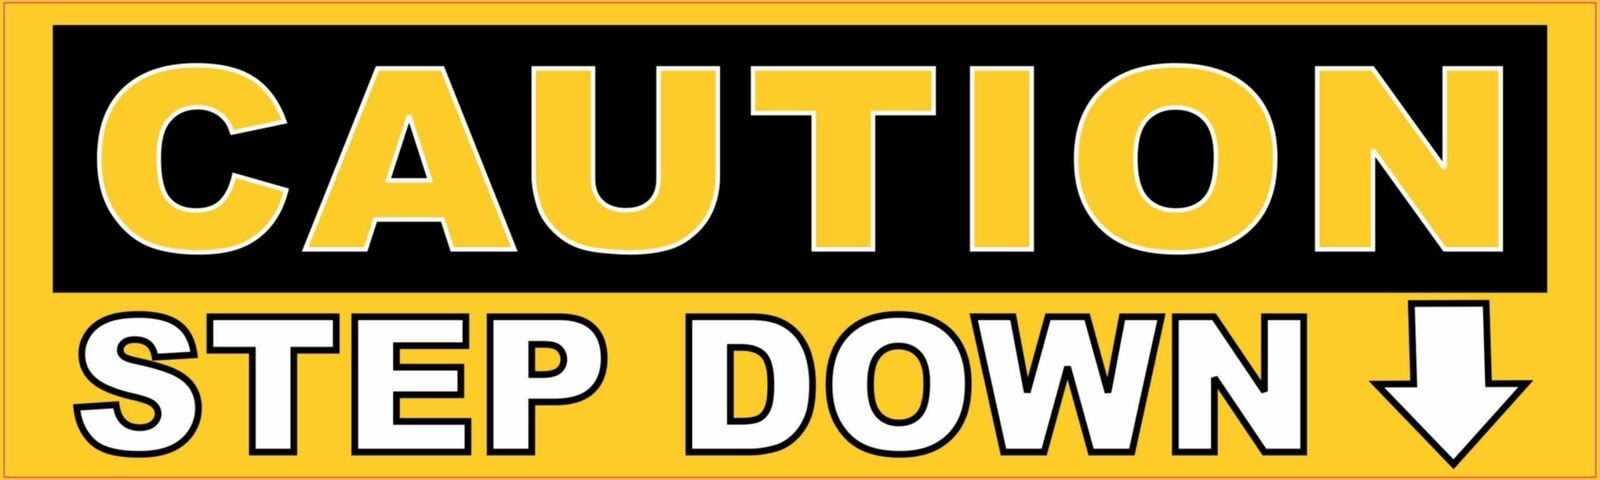 10in x 3in  Caution Step Down Sticker Vinyl Decal Sign Warning Stickers Decals